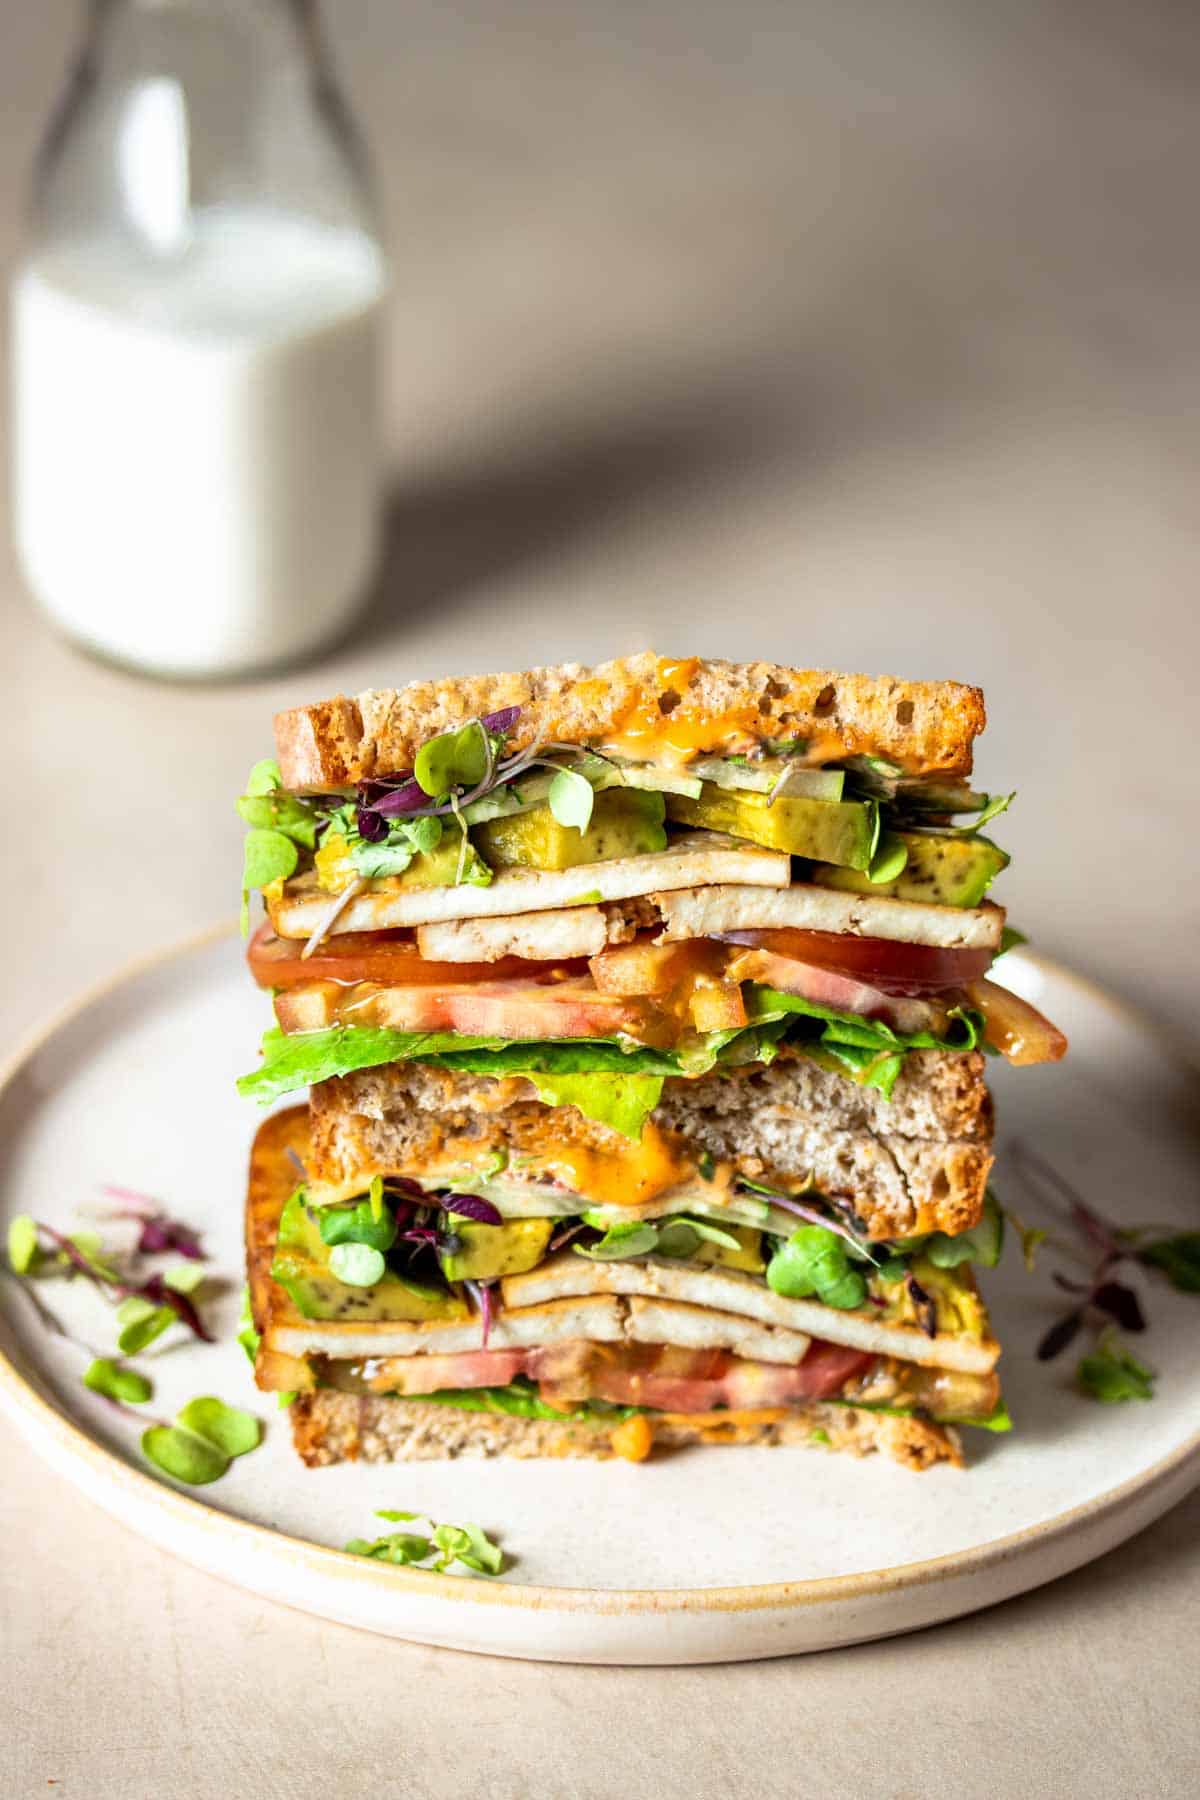 A tofu and veggie sandwich that has been cut in half and stacked on a tanish plate in front of a glass of milk.